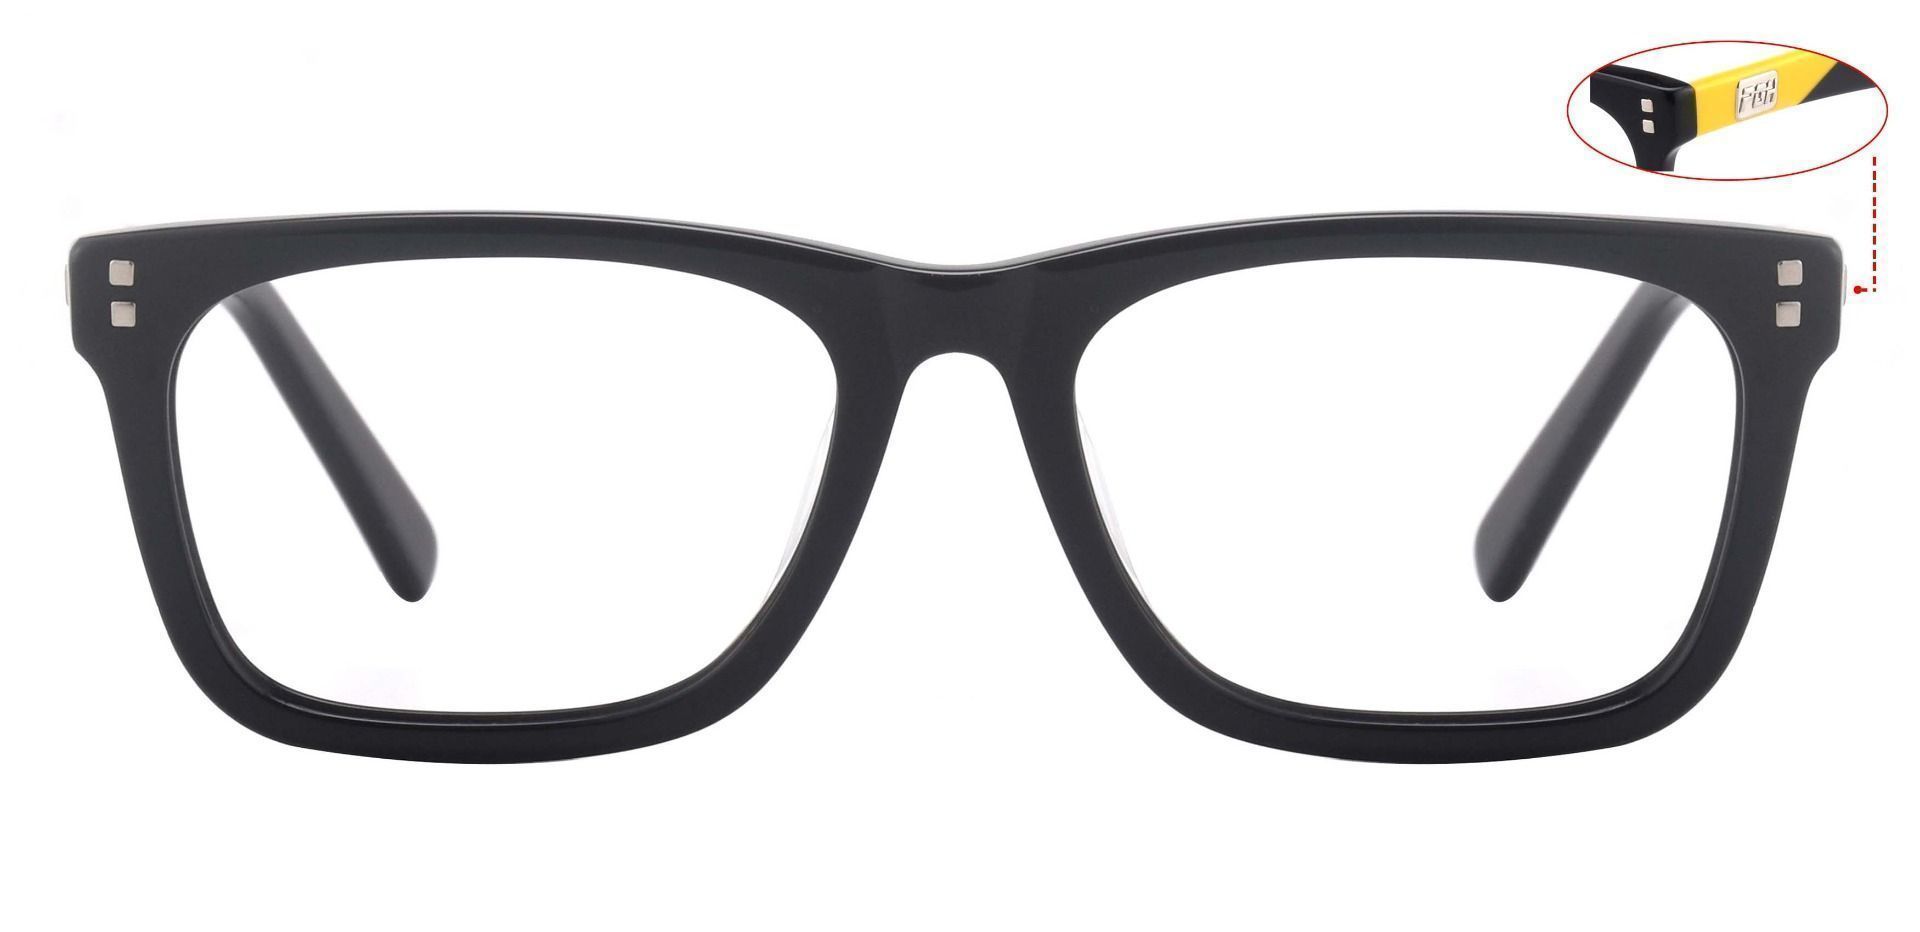 Blitz Rectangle Blue Light Blocking Glasses - The Frame Is Black And Yellow